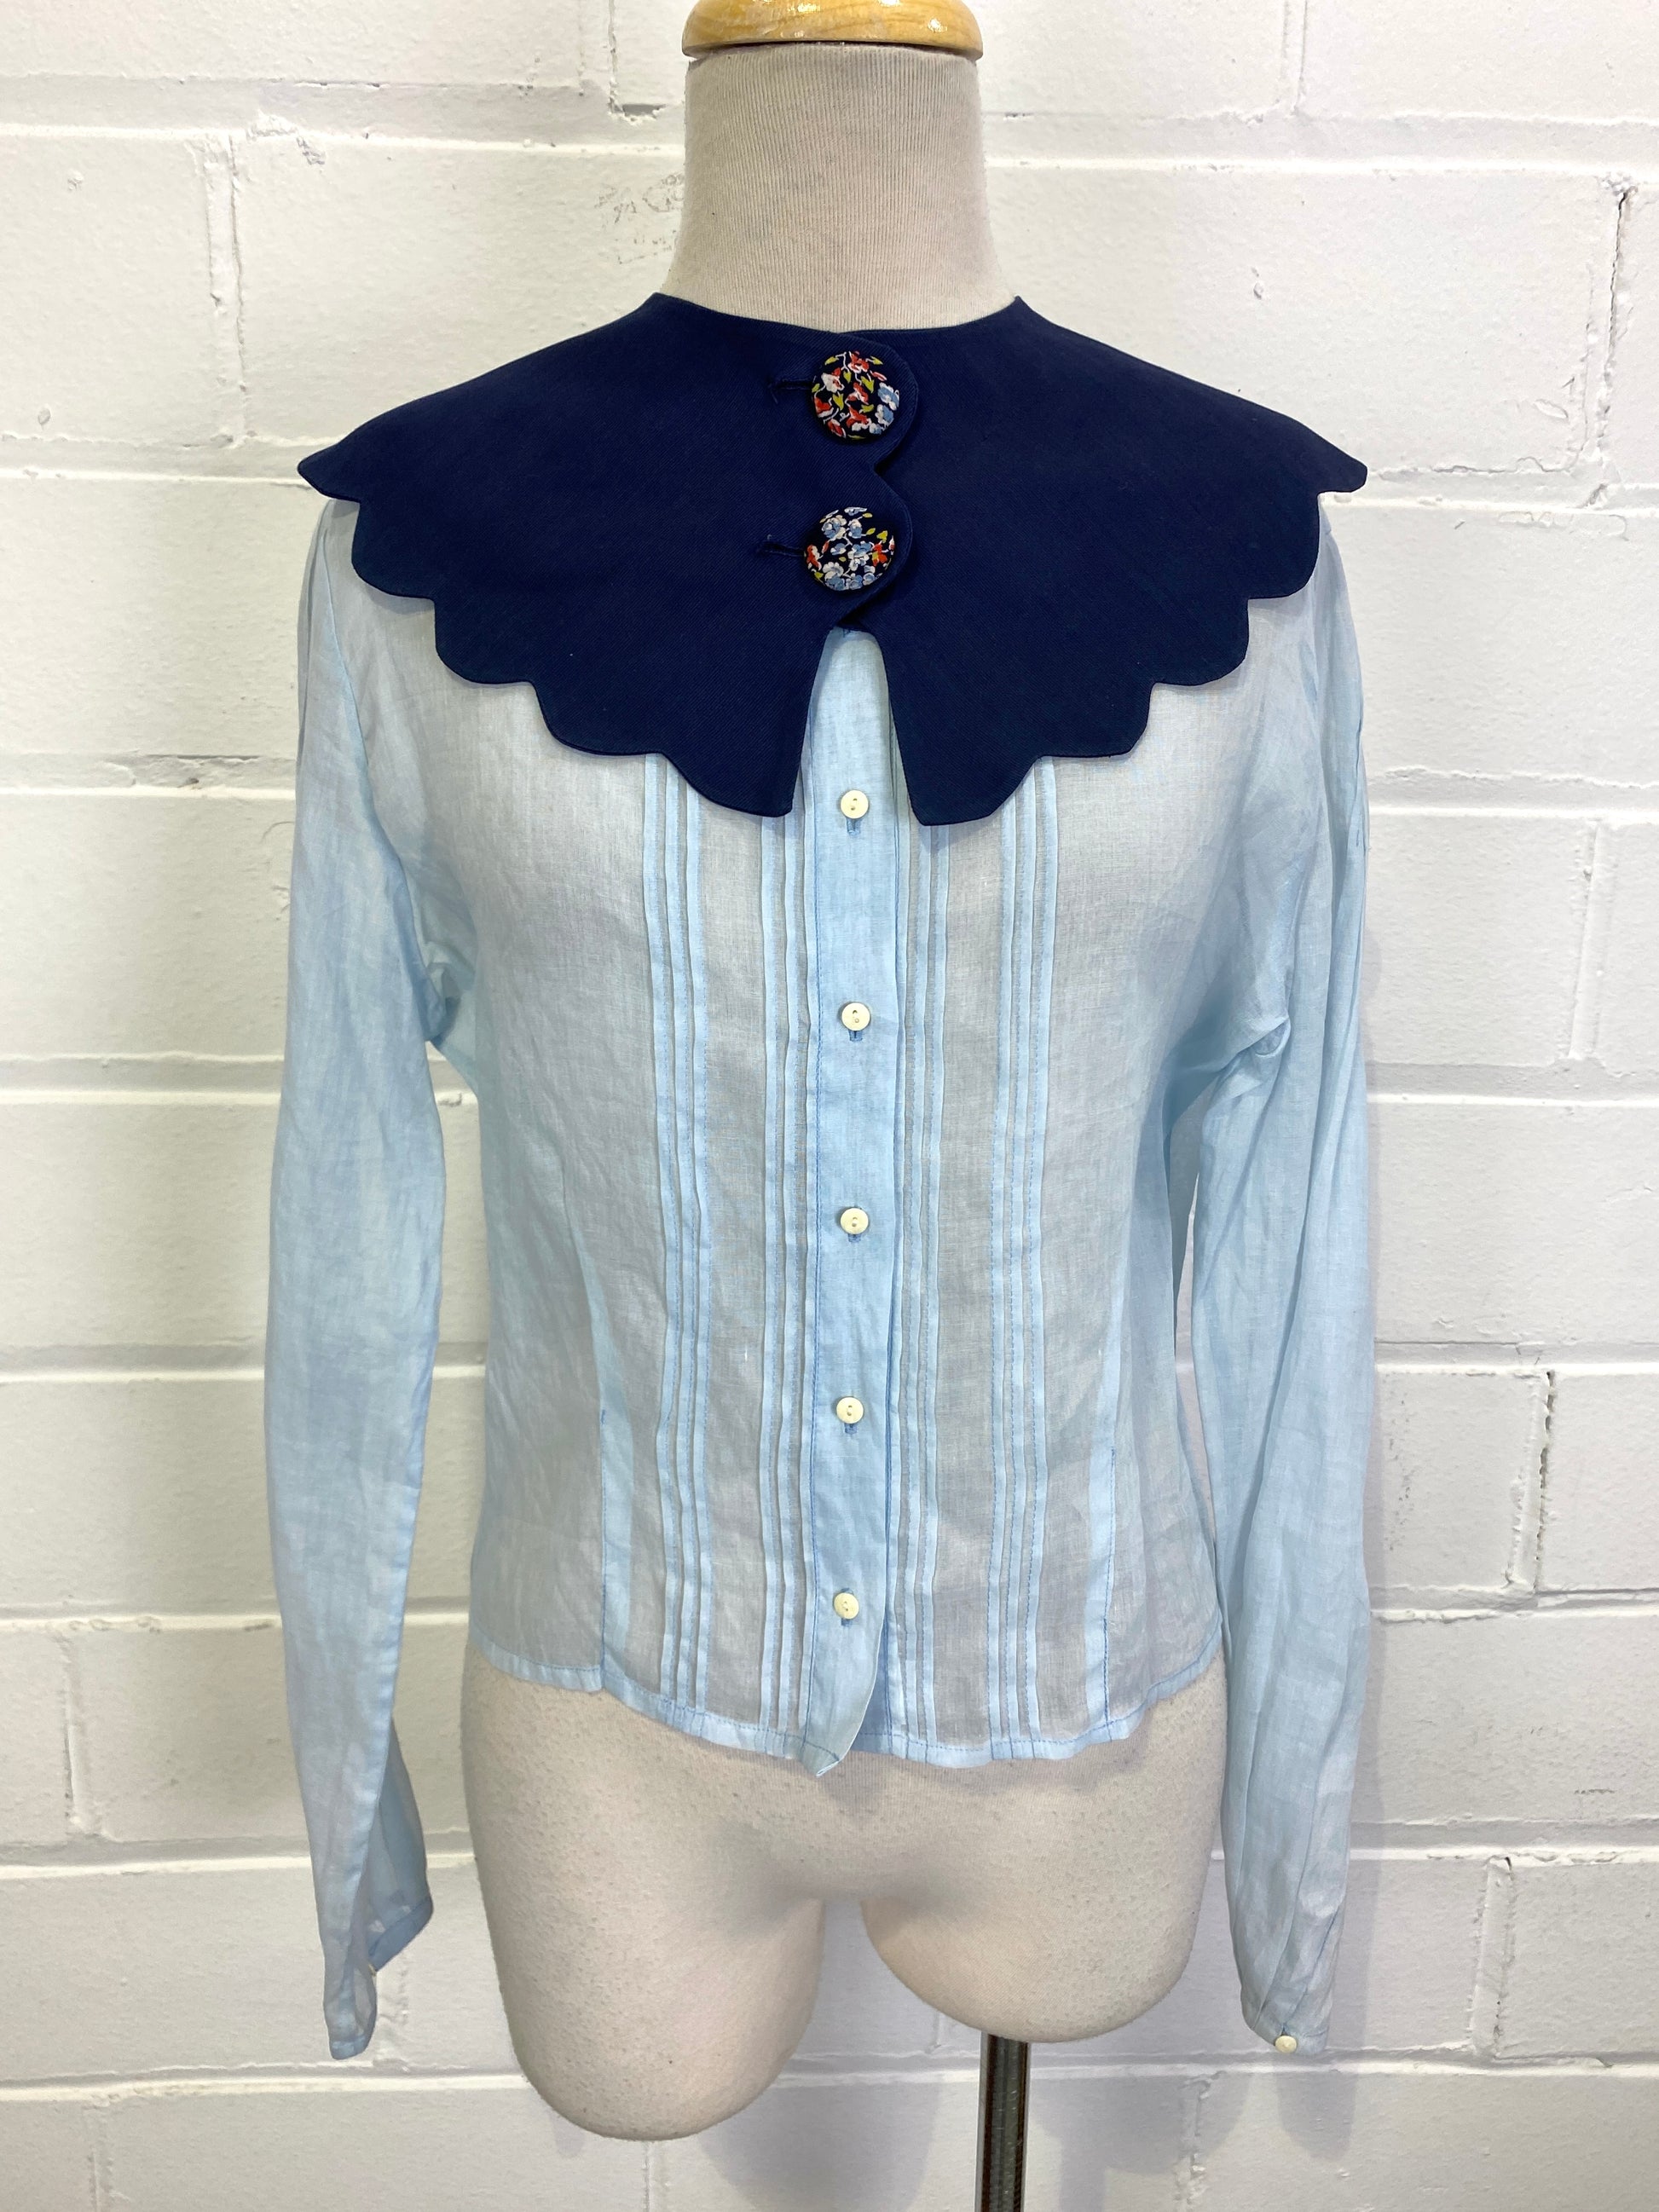 Vintage 1930s Blue Scallop Edge Collar with Floral Buttons 